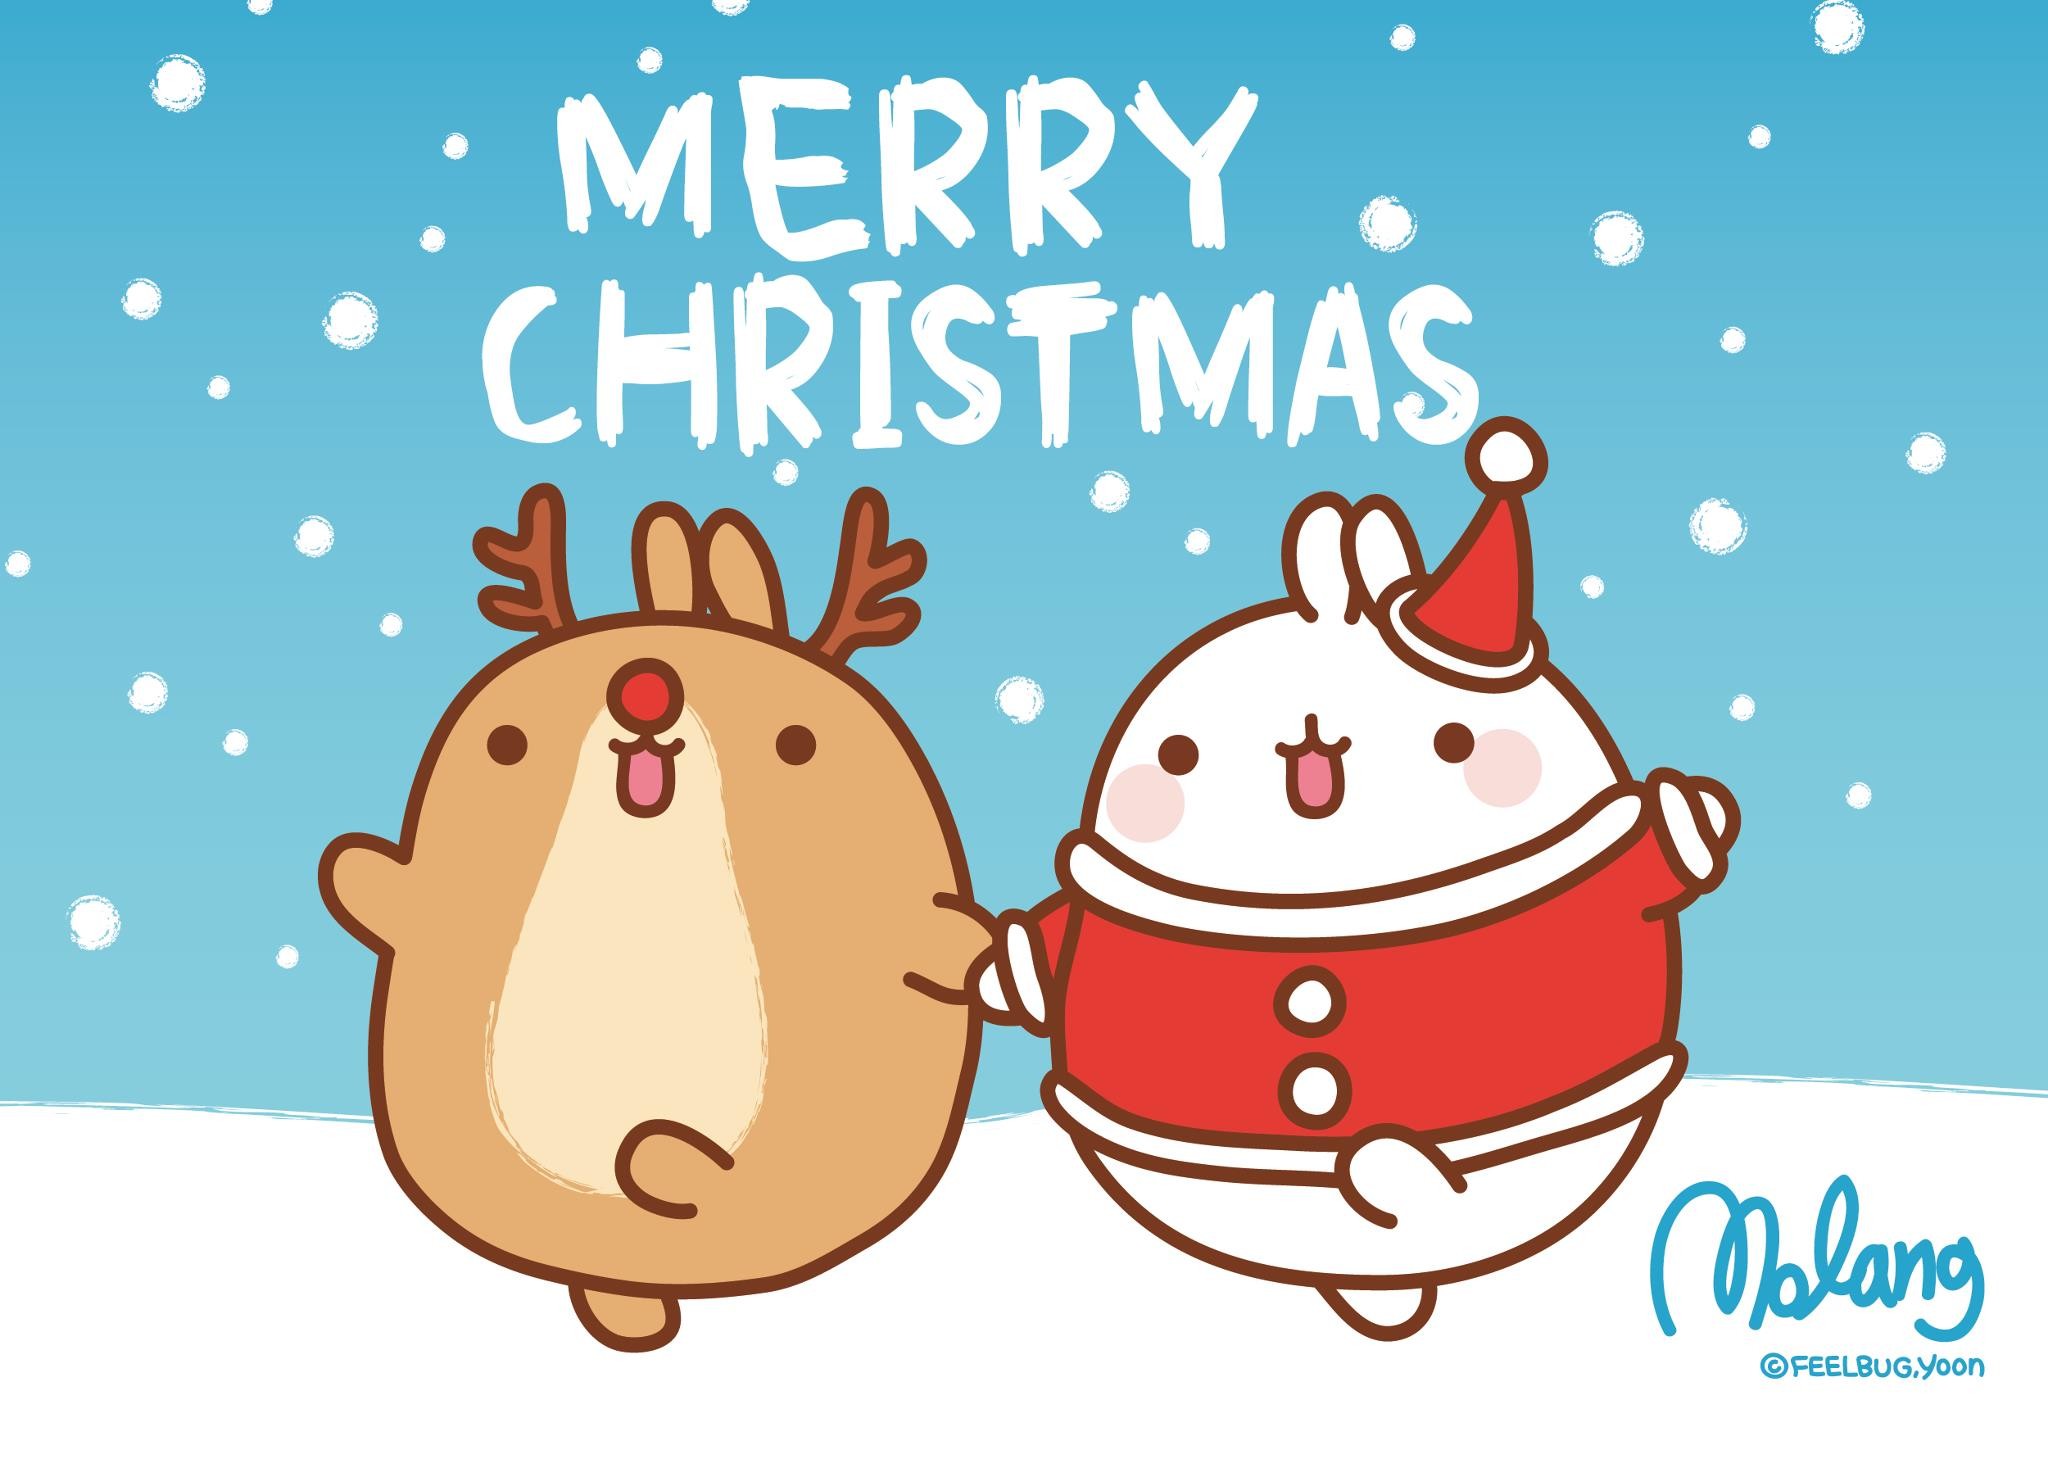 San-X Molang Christmas Desktop Wallpapers – Here are 3 super cute Molang Desktop  Backgrounds for Christmas! Click each image to be taken to the full size …